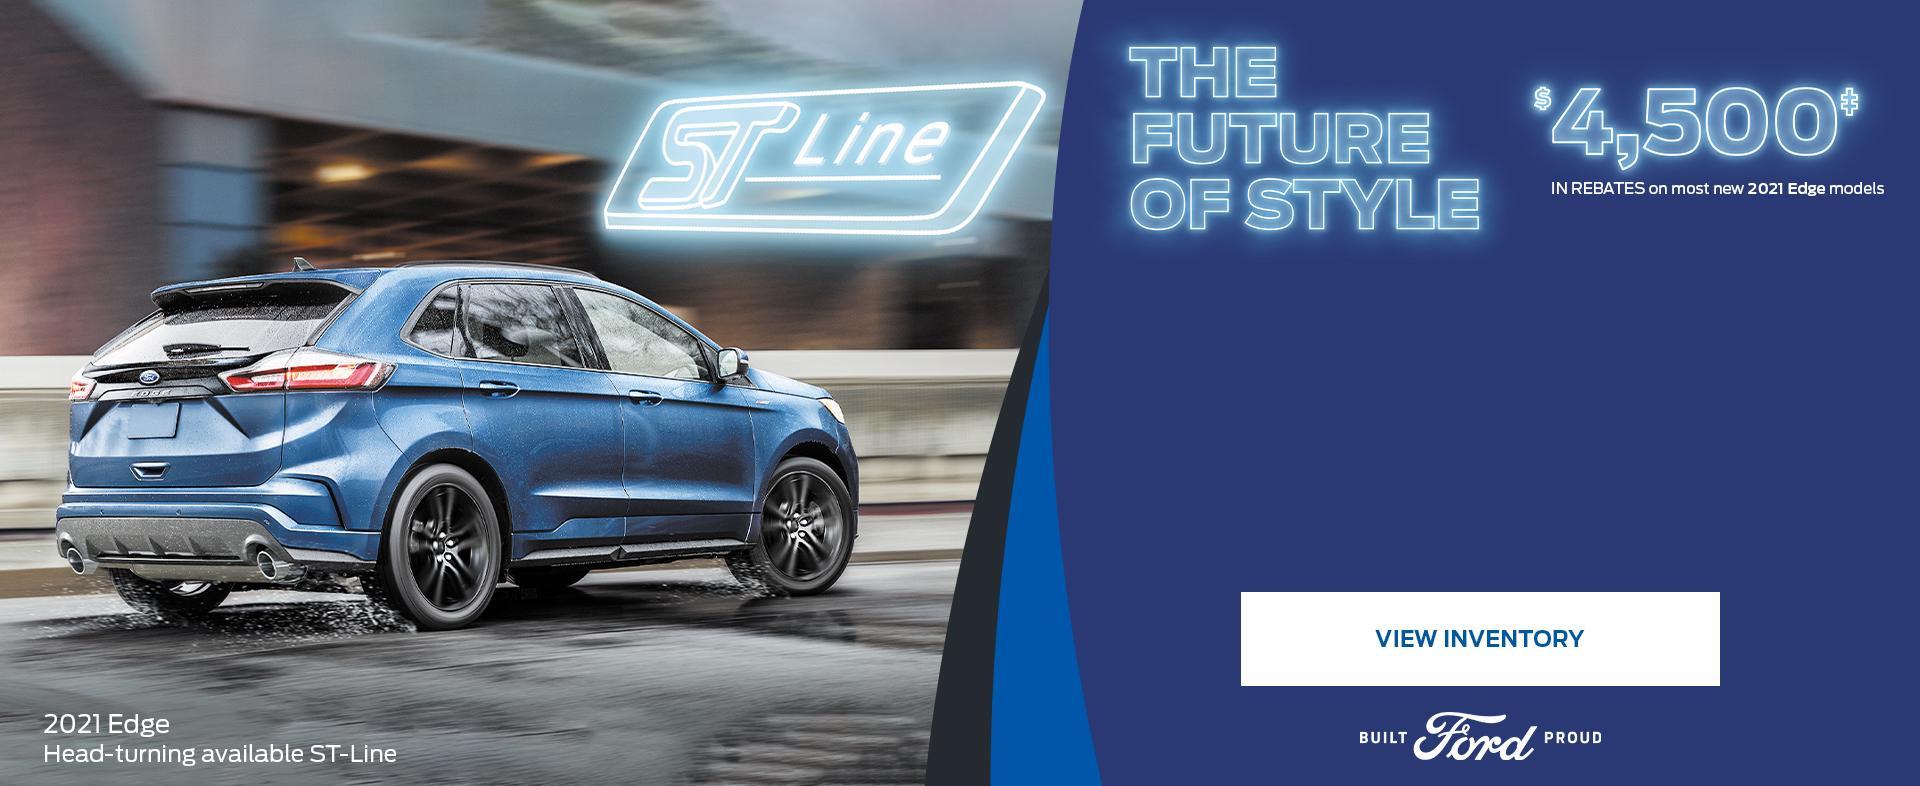 2021 Ford Edge | Future of Style  | Ford of Canada